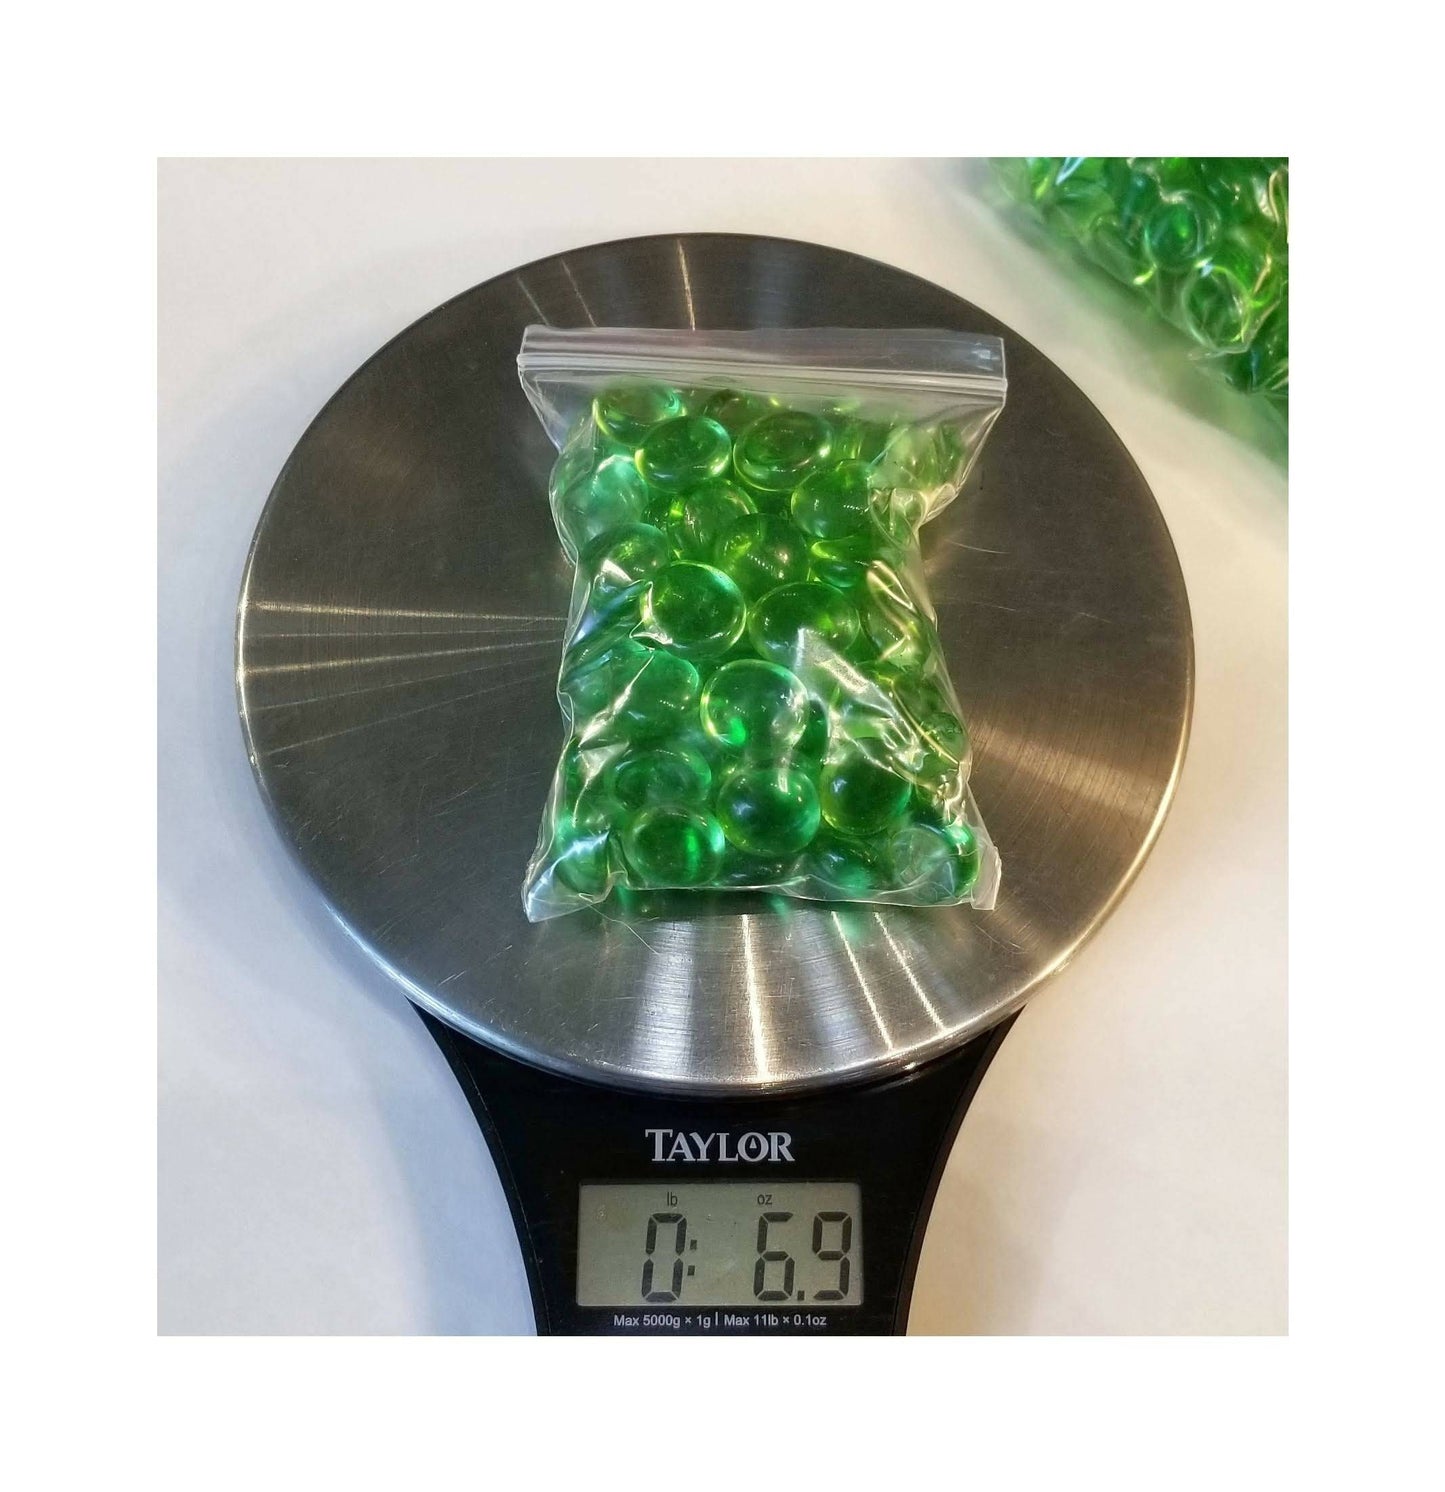 Lime Glass Nuggets for Stained Glass. Steppingstones, Jewelry Making Supply, Teen Craft Projects. Vintage Medium sized Gems as pictured.